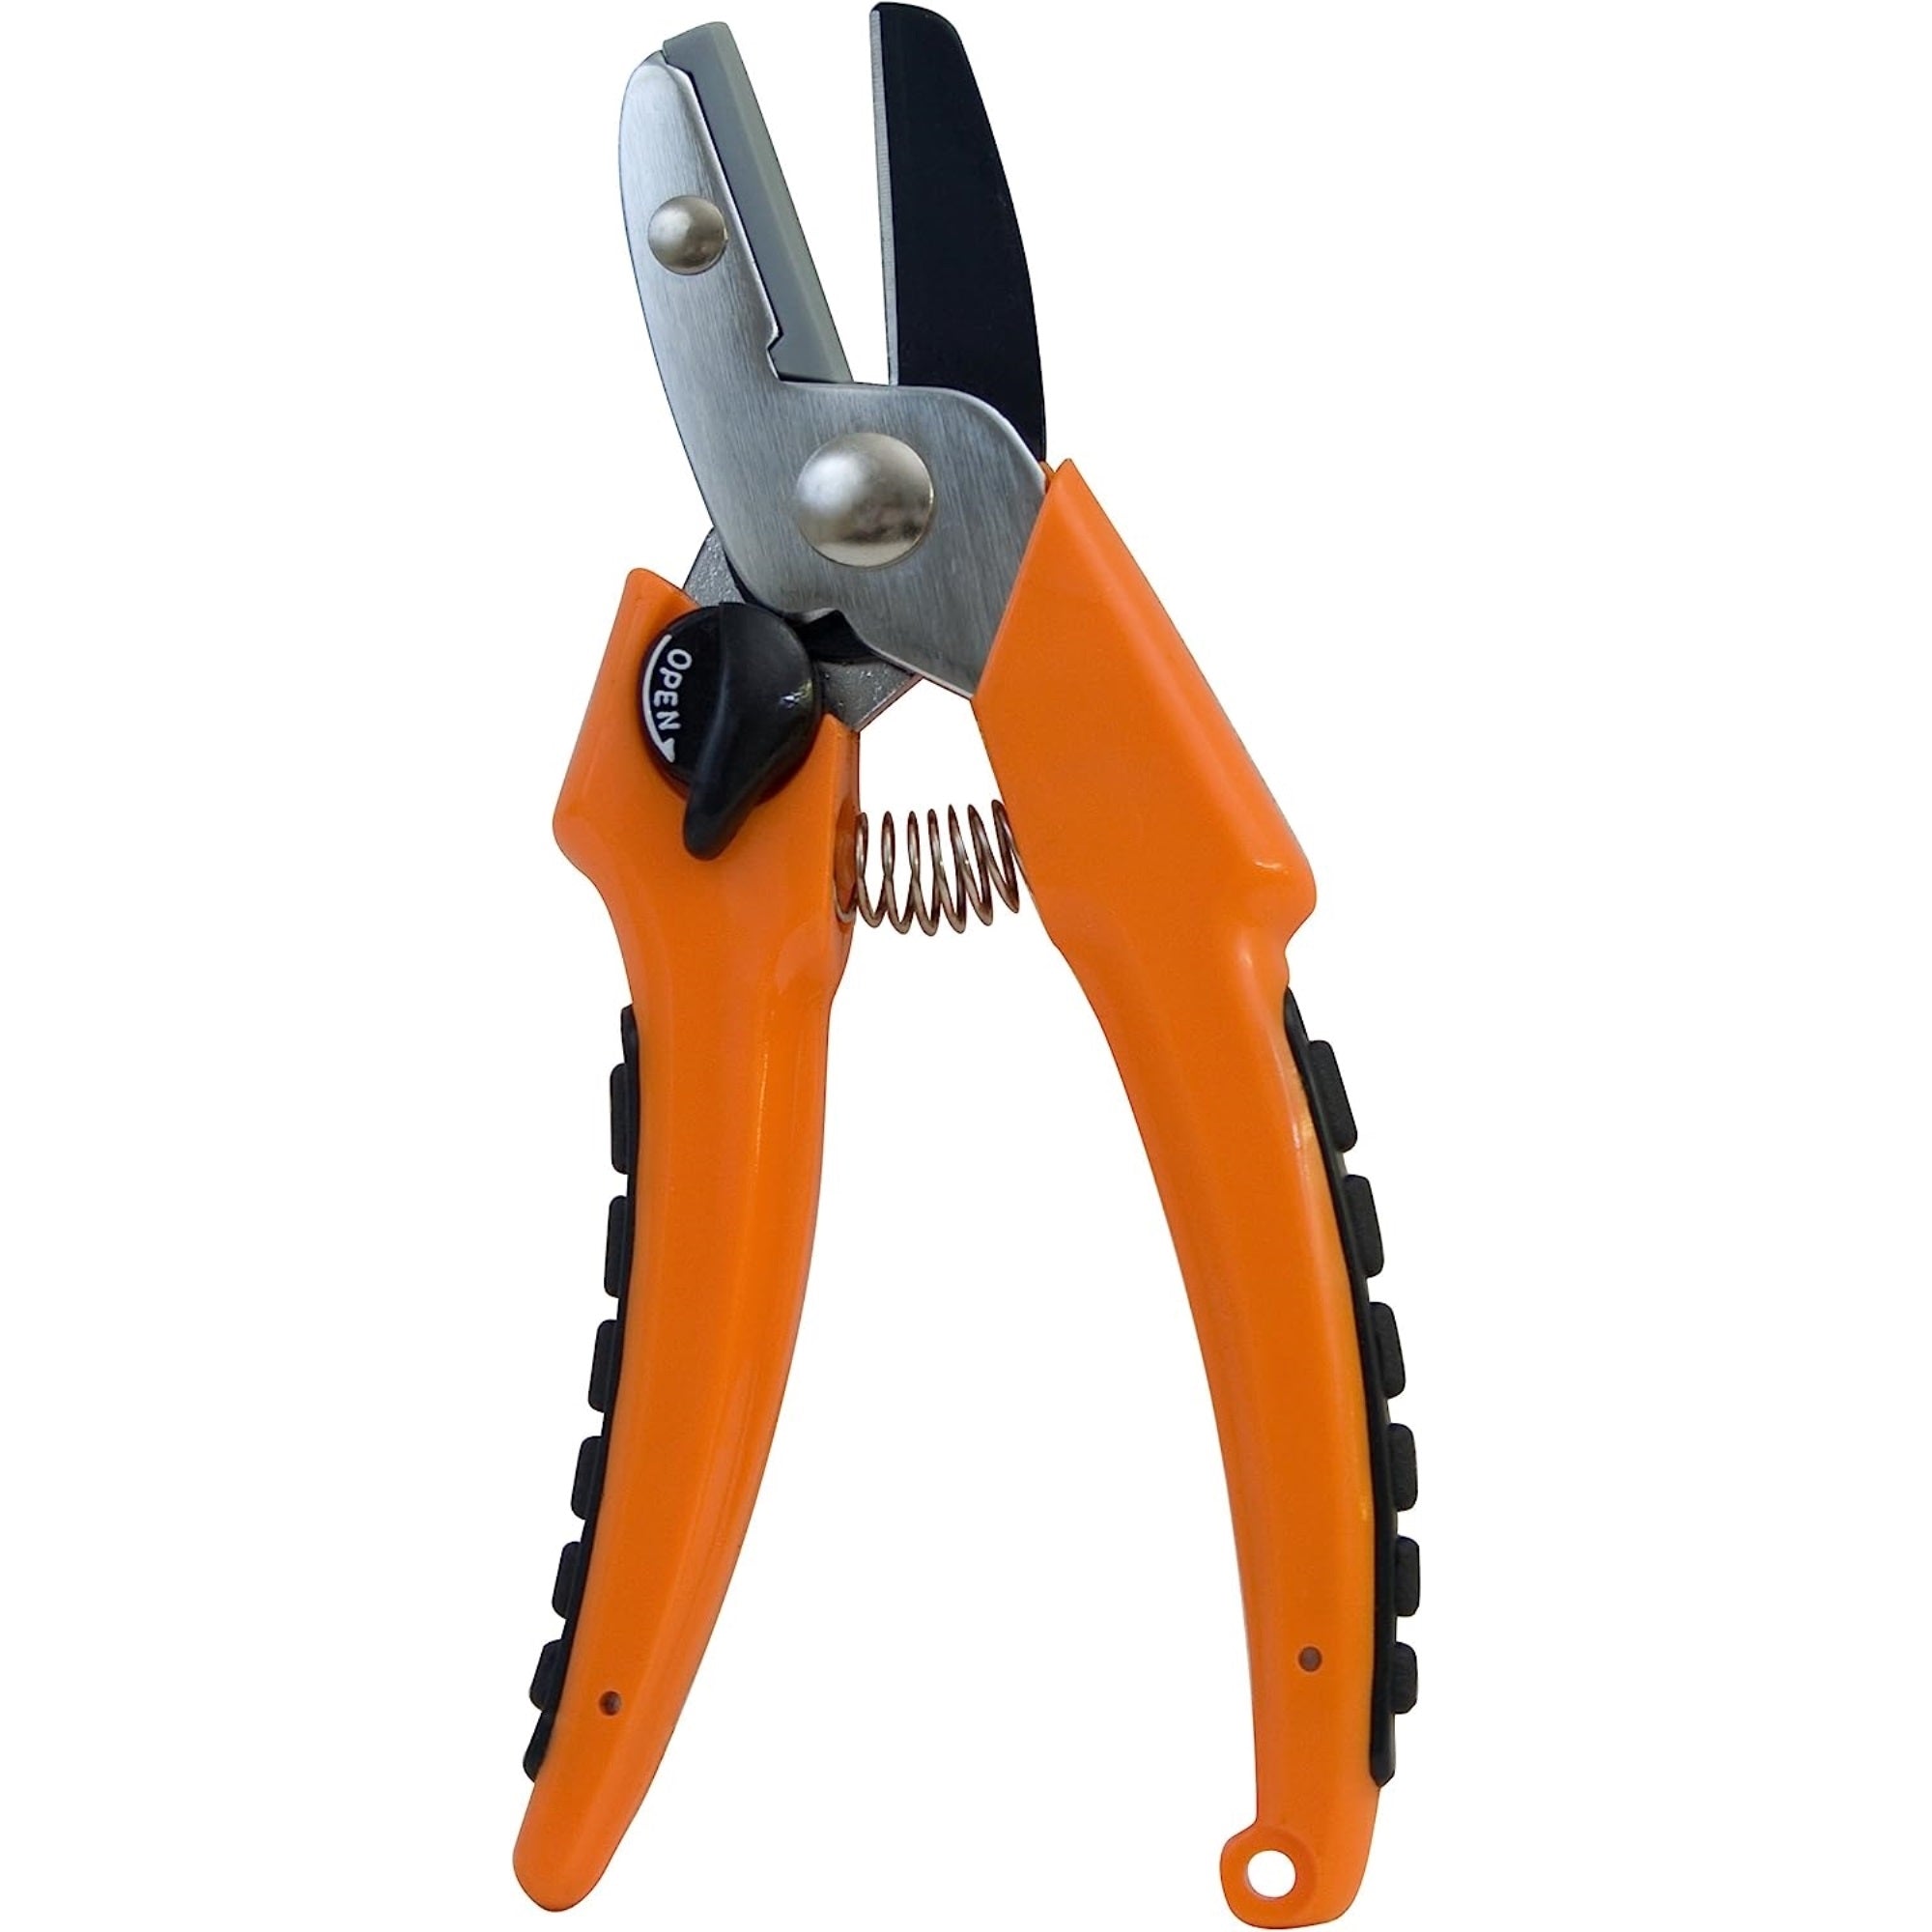 Flexrake Deluxe Anvil Pruner with Molded Plastic Handles, 1-inch Cutting Capacity